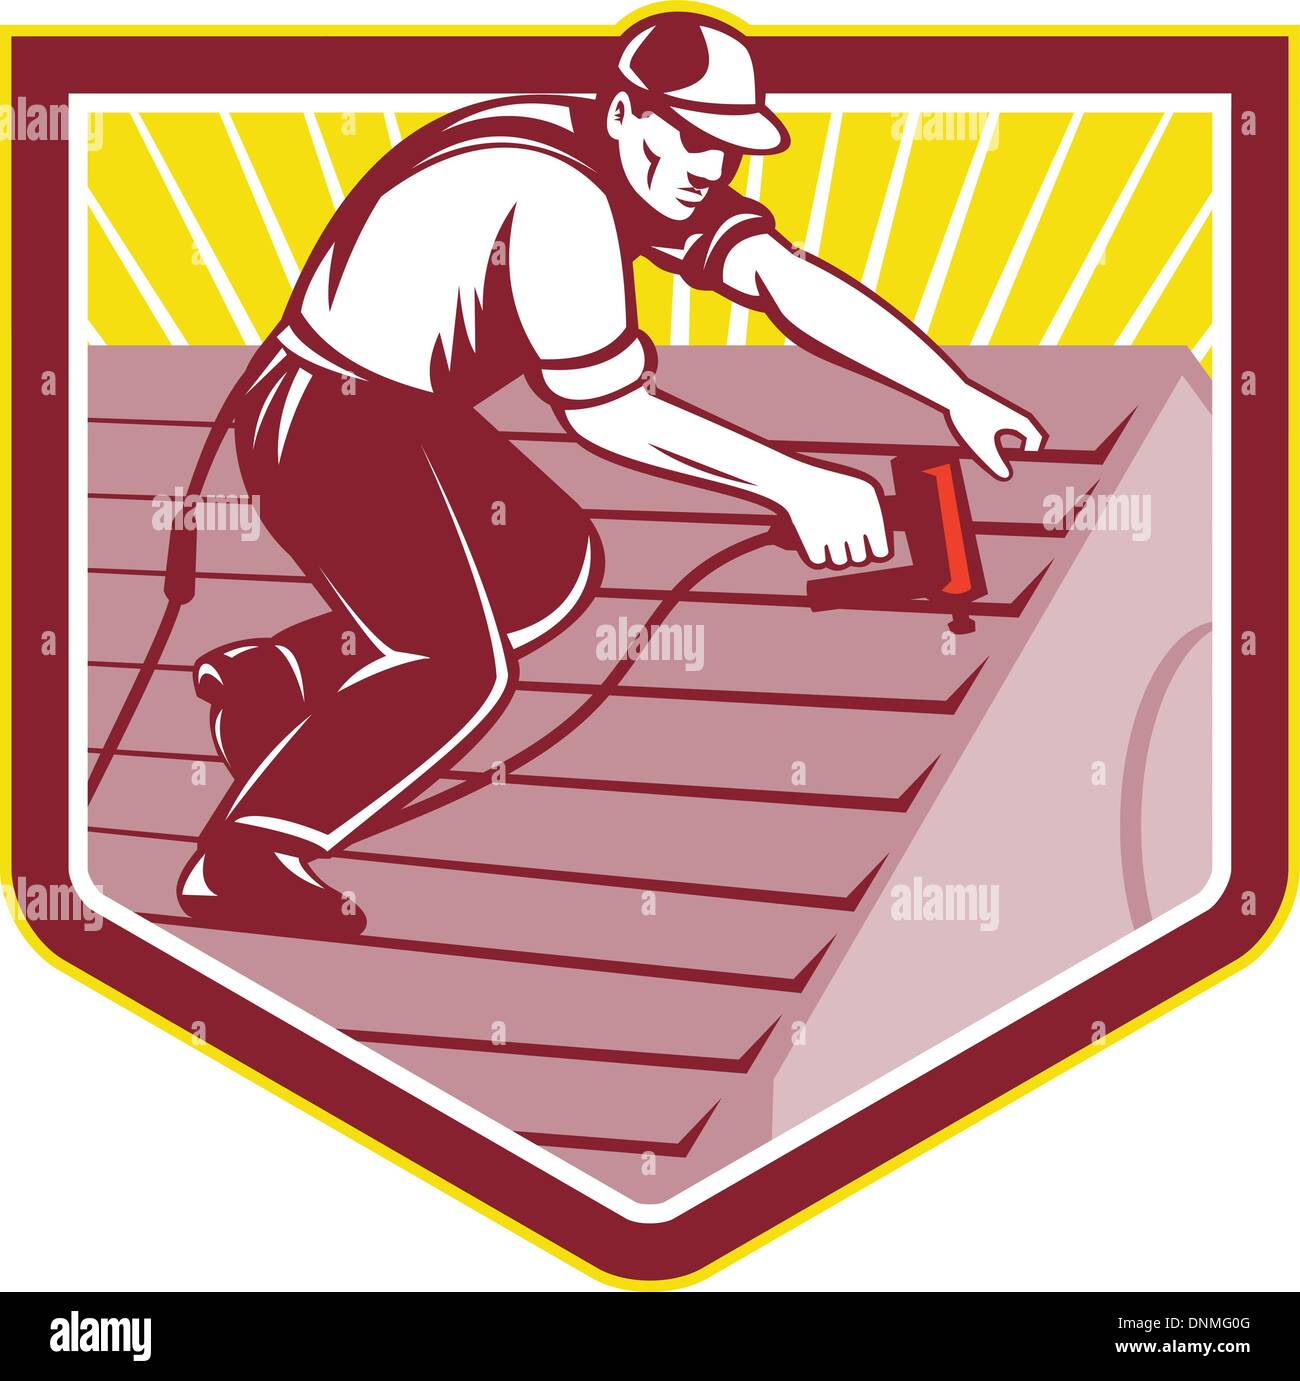 Illustration of a roofer construction worker roofing working on house roof with nail gun nailgun nailer done in retro style. Stock Vector